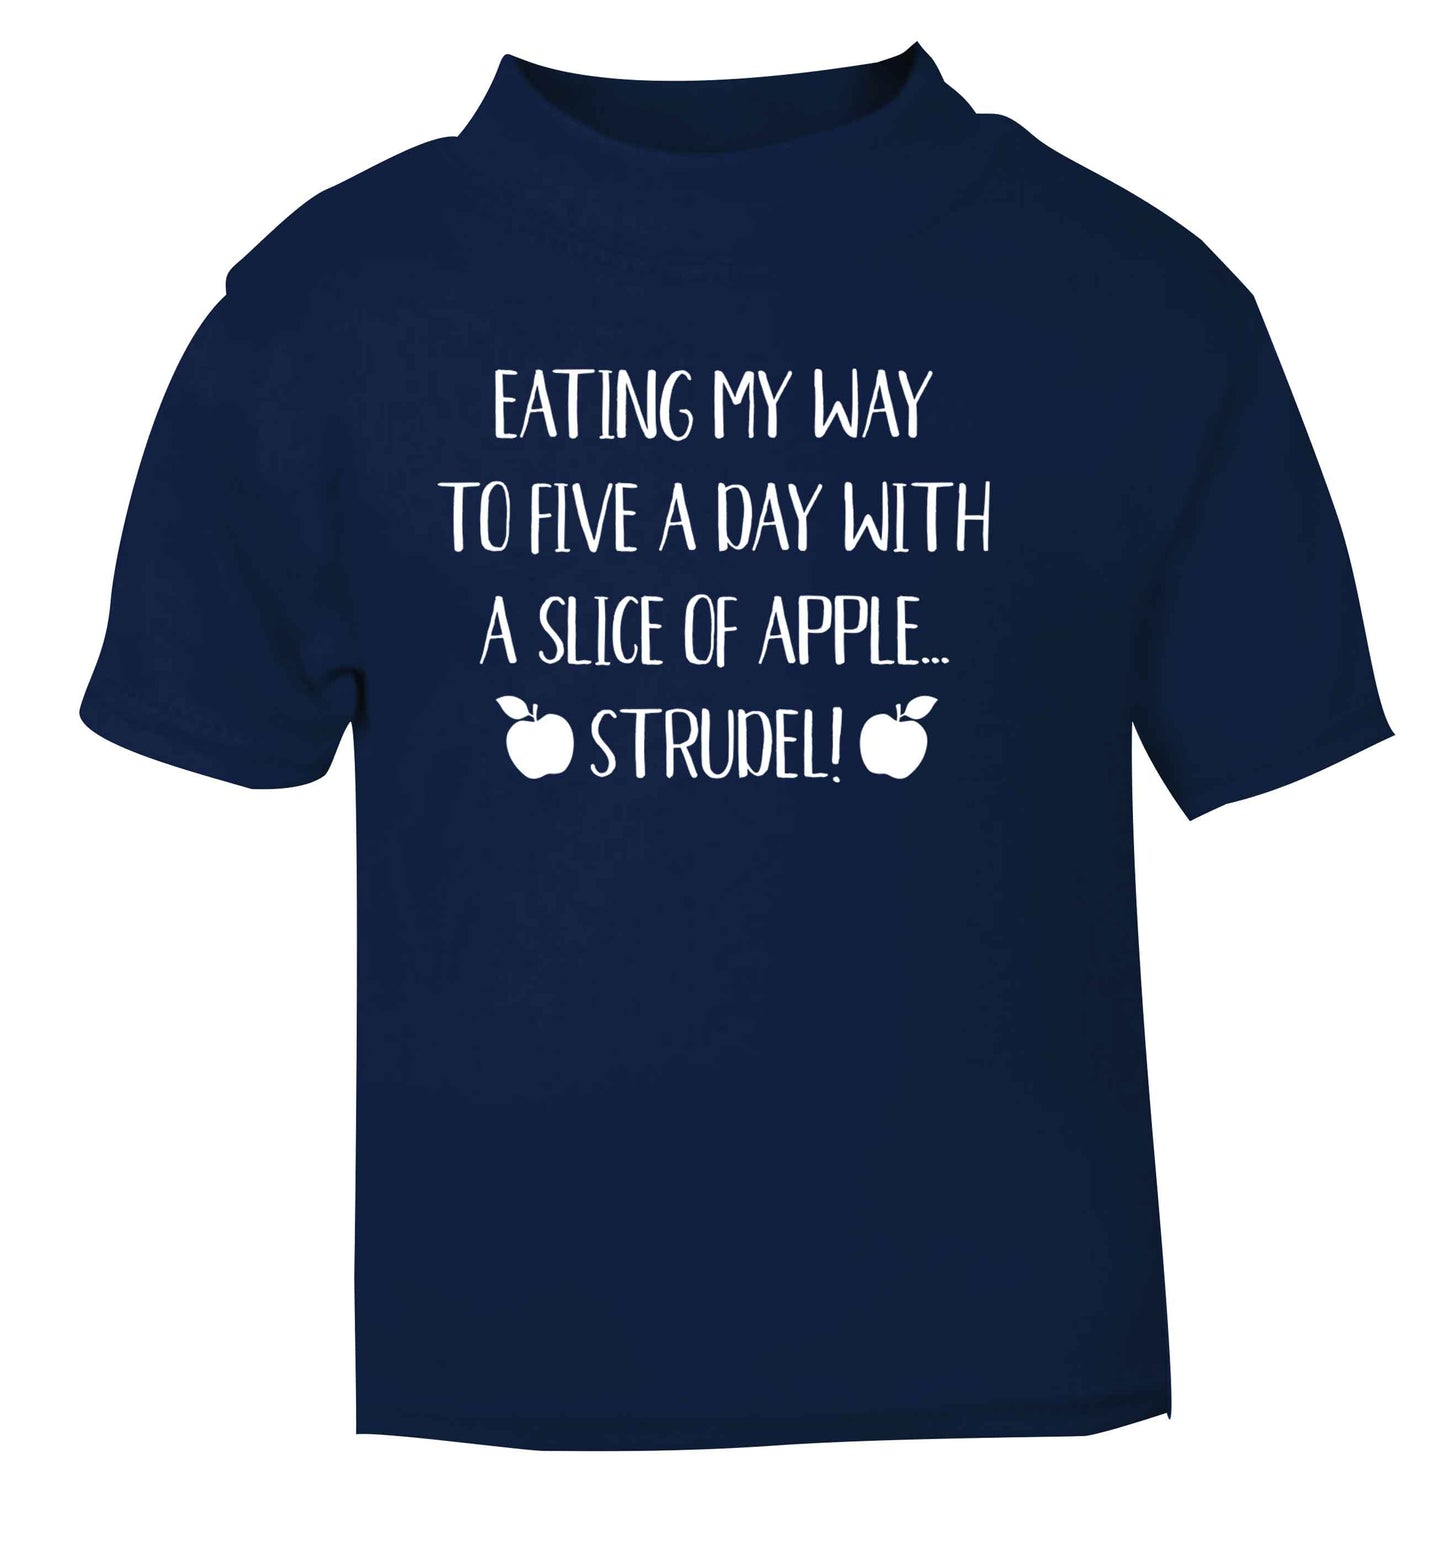 Eating my way to five a day with a slice of apple strudel navy Baby Toddler Tshirt 2 Years